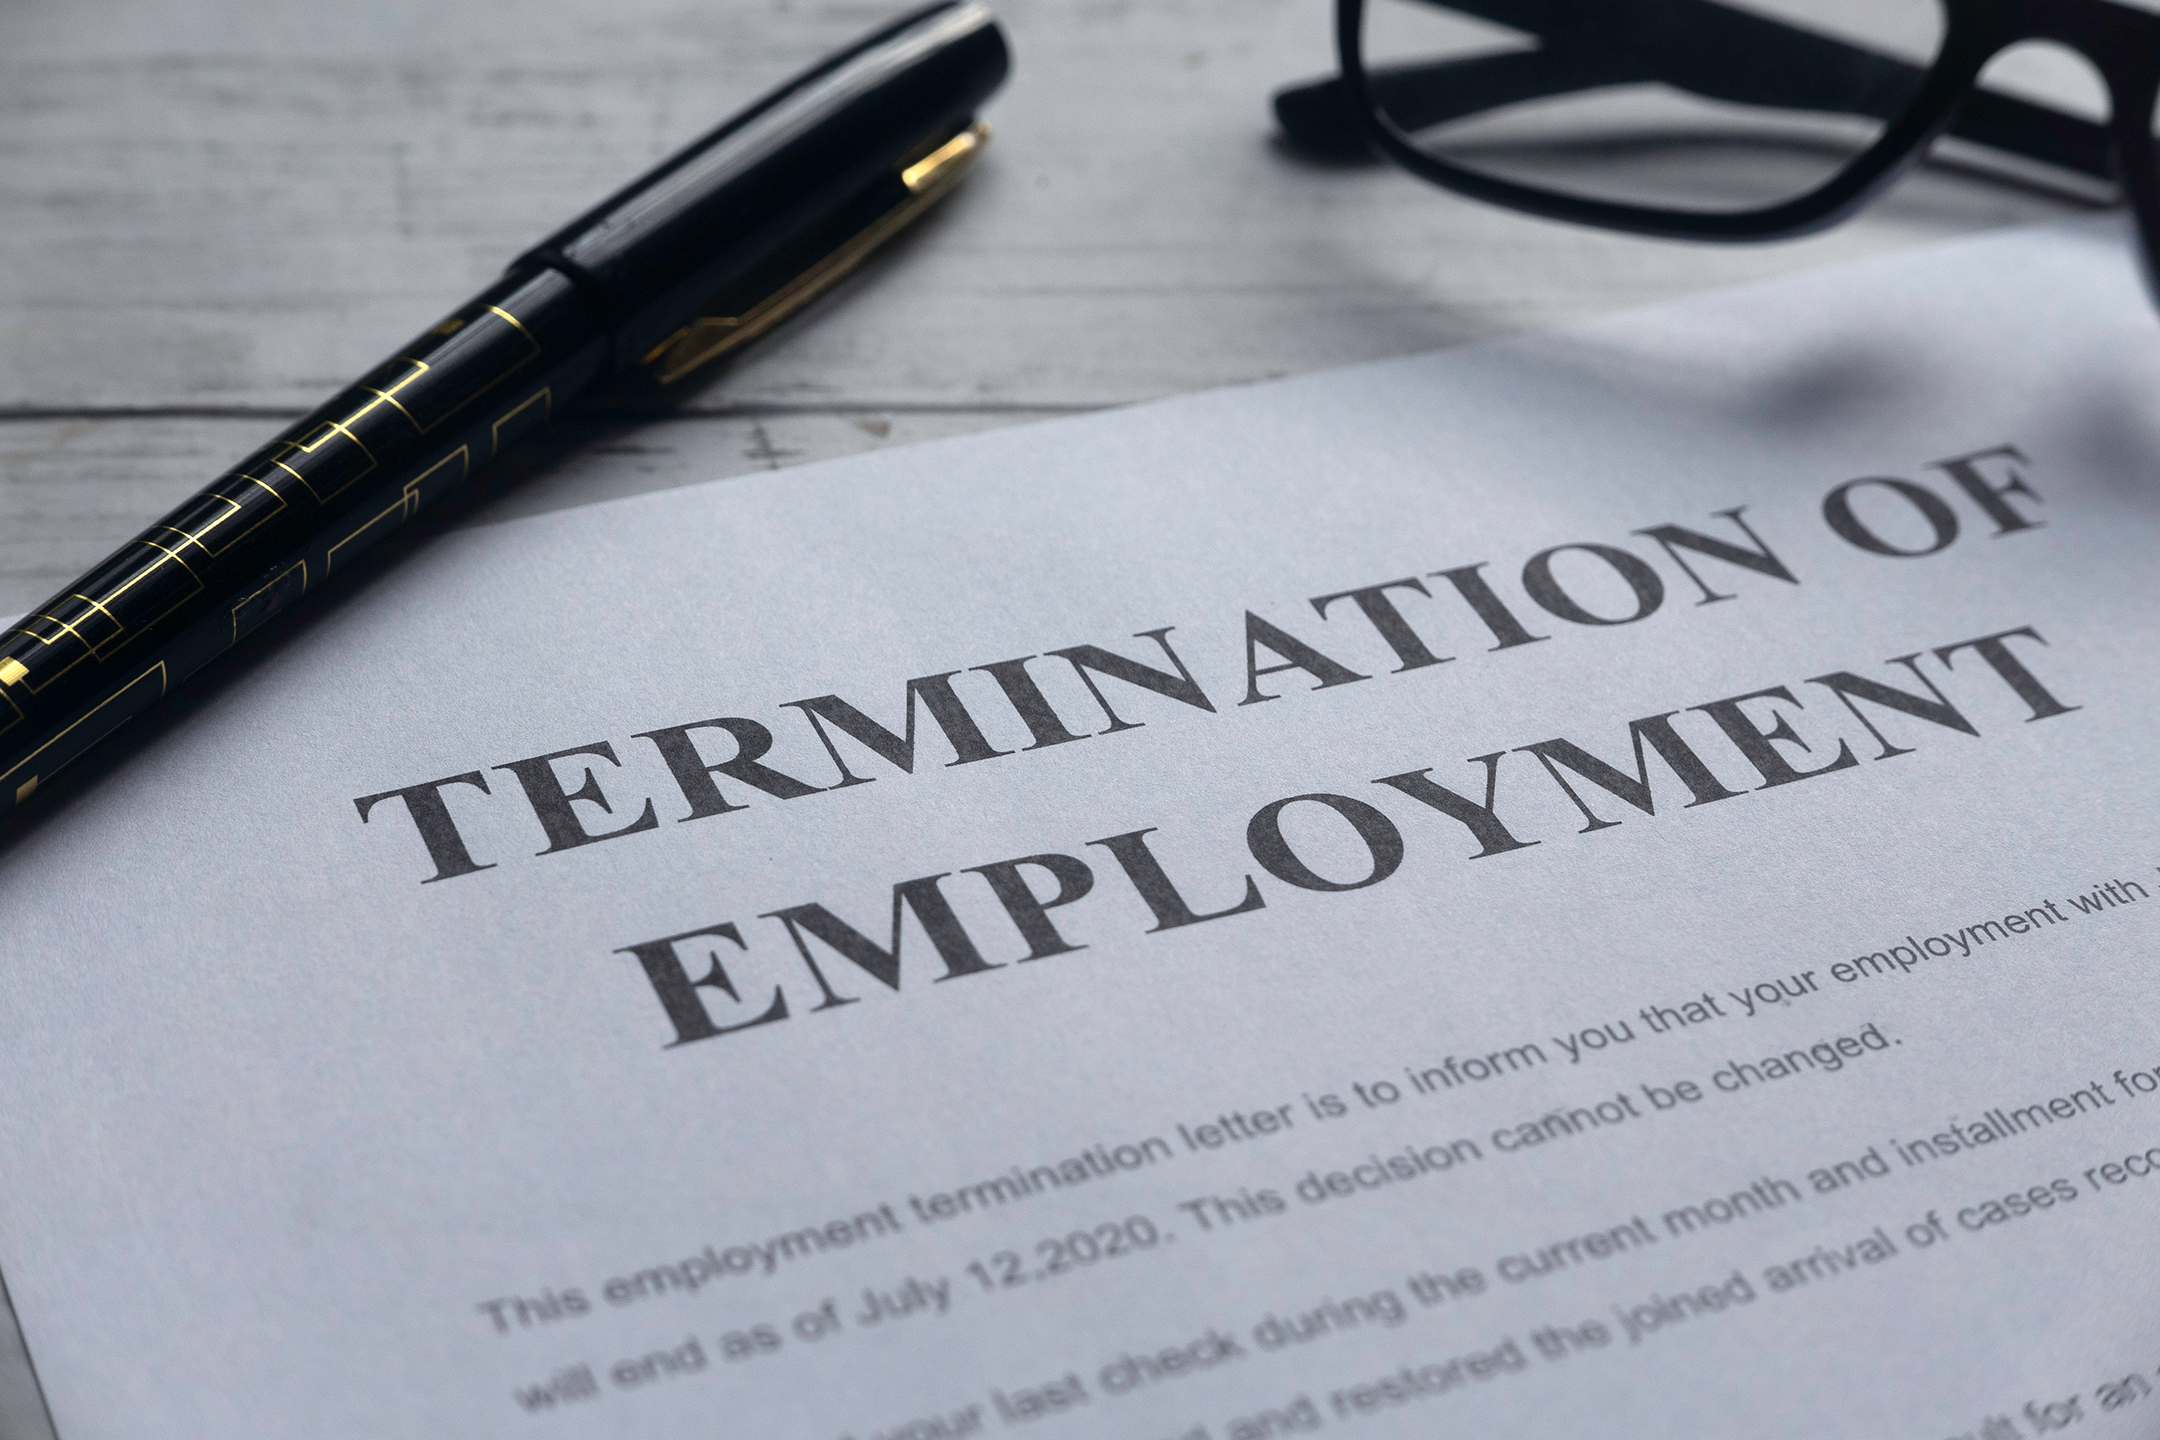 FTC proposes the end of employment-based non-compete agreements